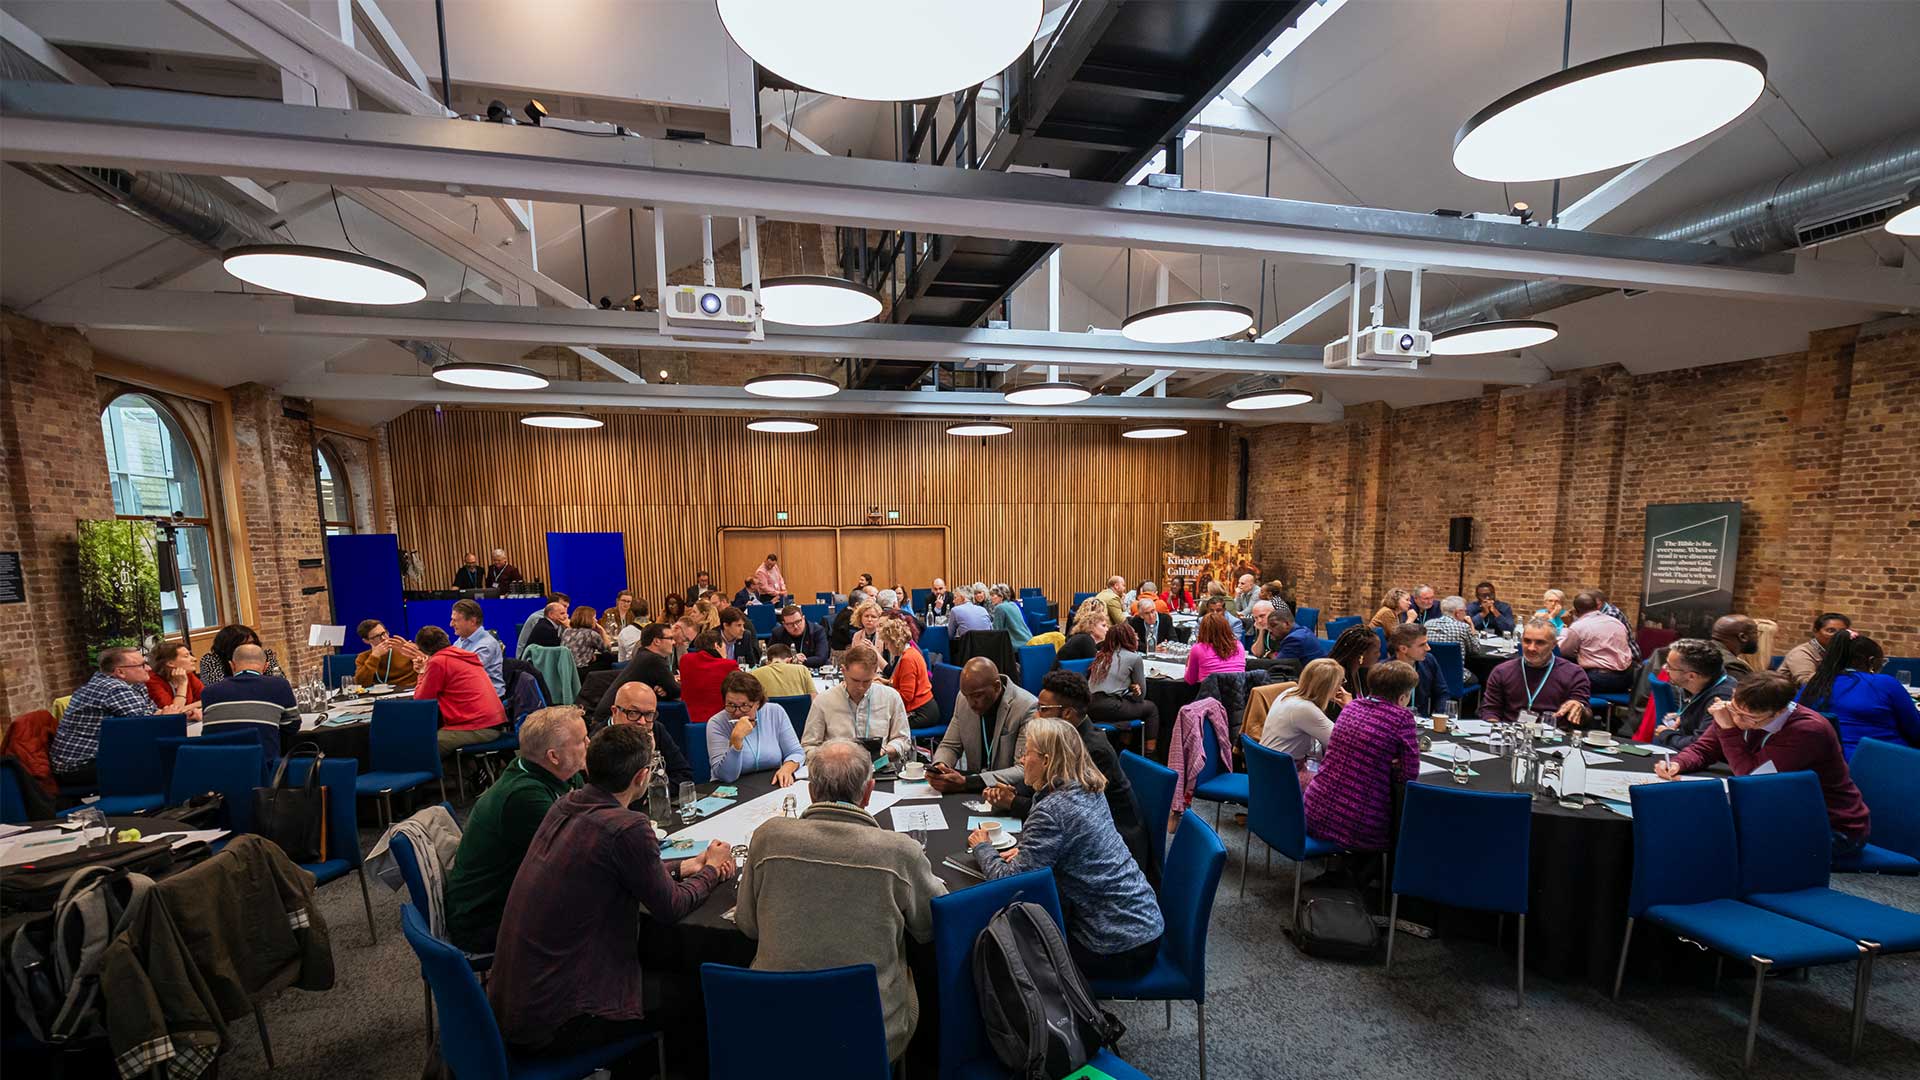 Bible Society has hosted a significant conference for church leaders and influencers who came together came together to reflect on how to do Bible mission together in a changing world.